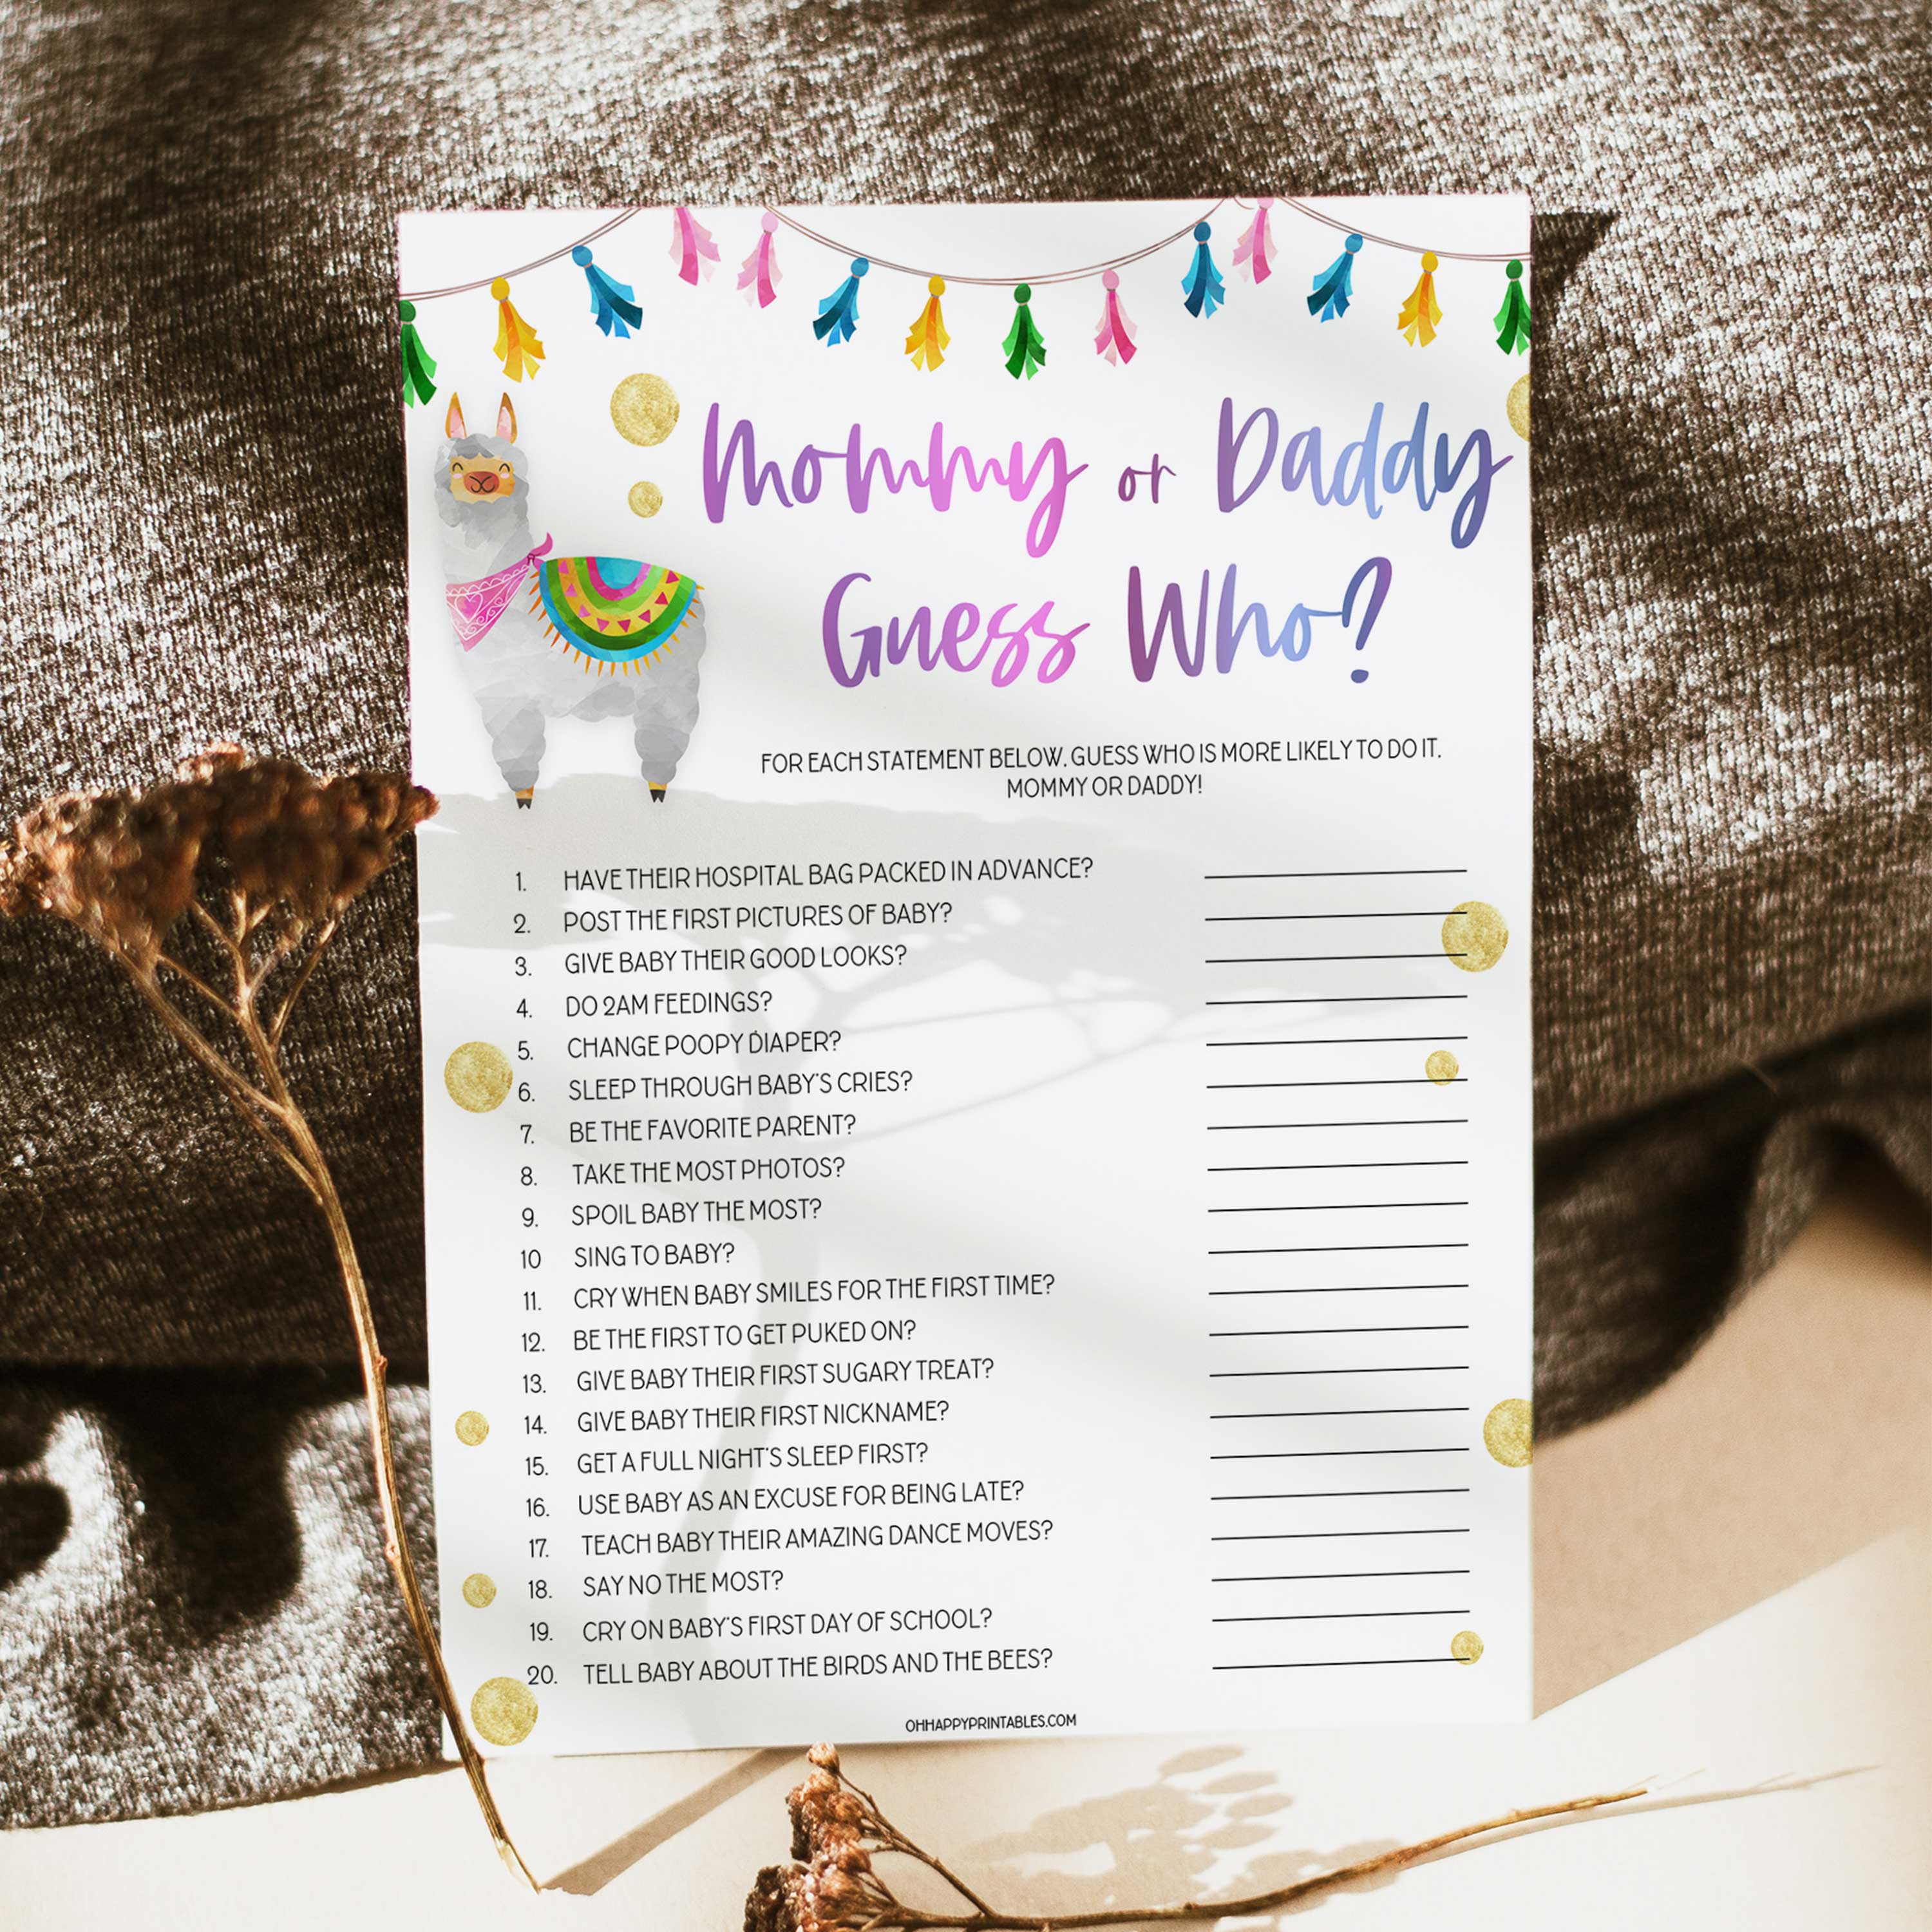 guess who baby game, mommy or daddy guess who, Printable baby shower games, llama fiesta fun baby games, baby shower games, fun baby shower ideas, top baby shower ideas, Llama fiesta shower baby shower, fiesta baby shower ideas